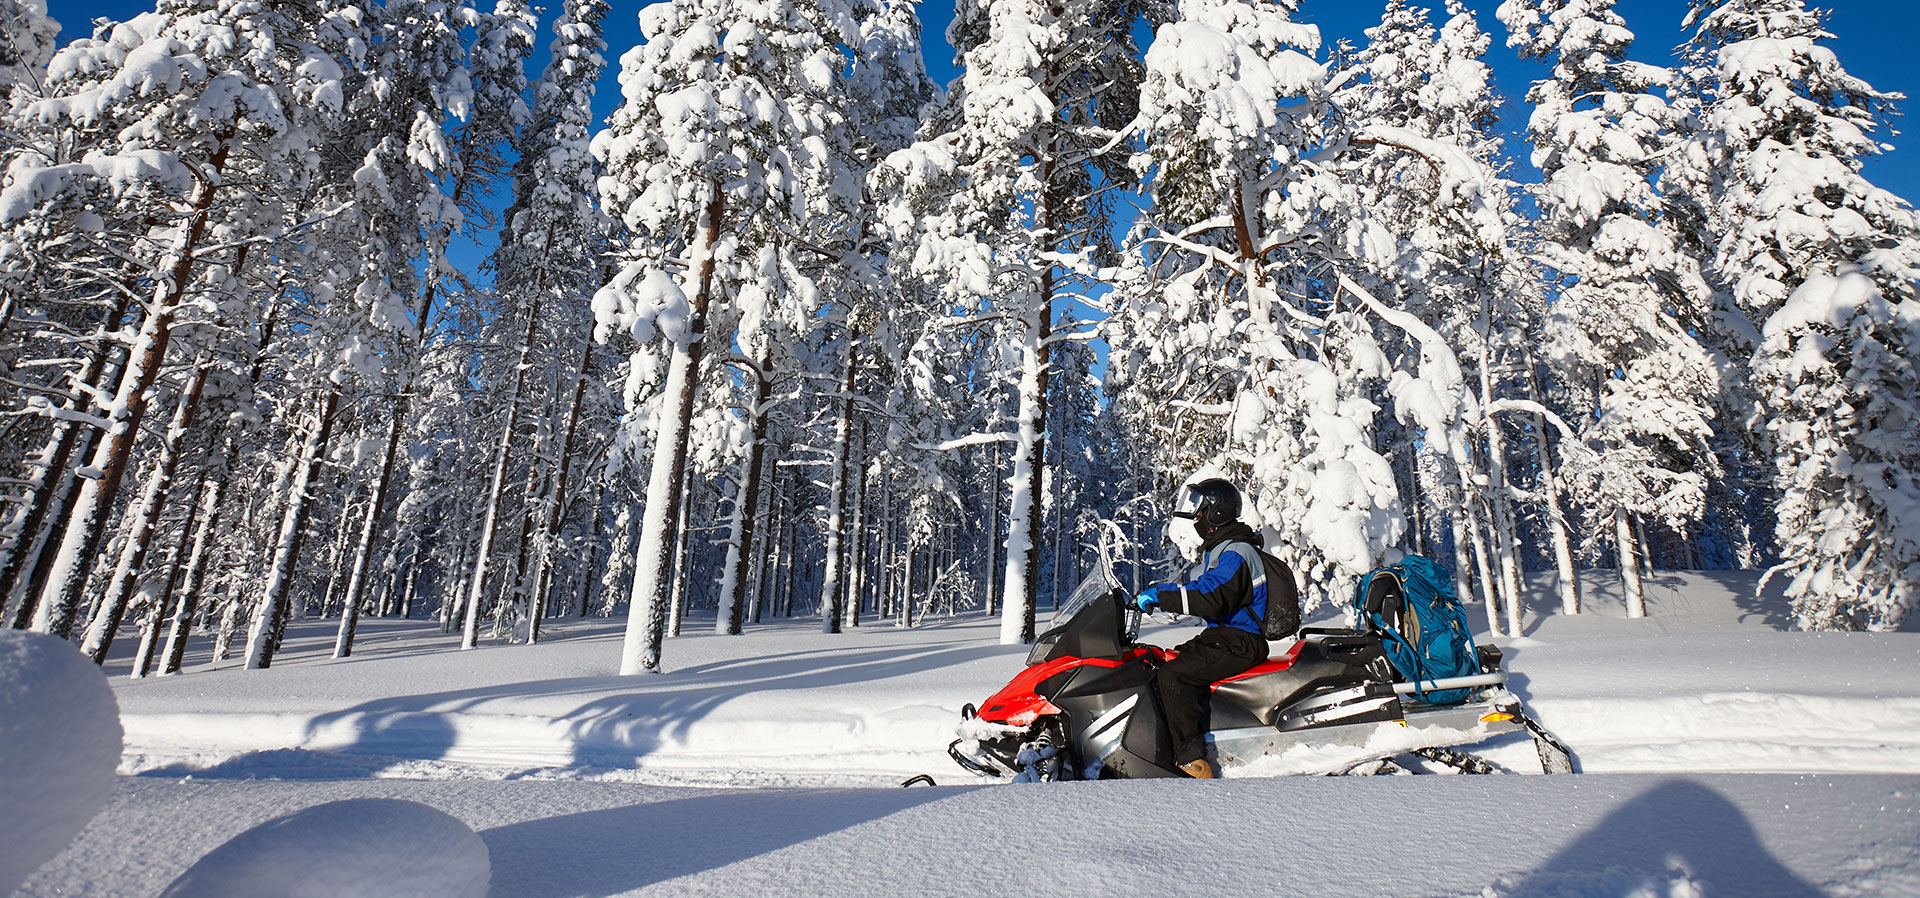 Minnesota snowmobiling trails wind throughout the state including within mo...